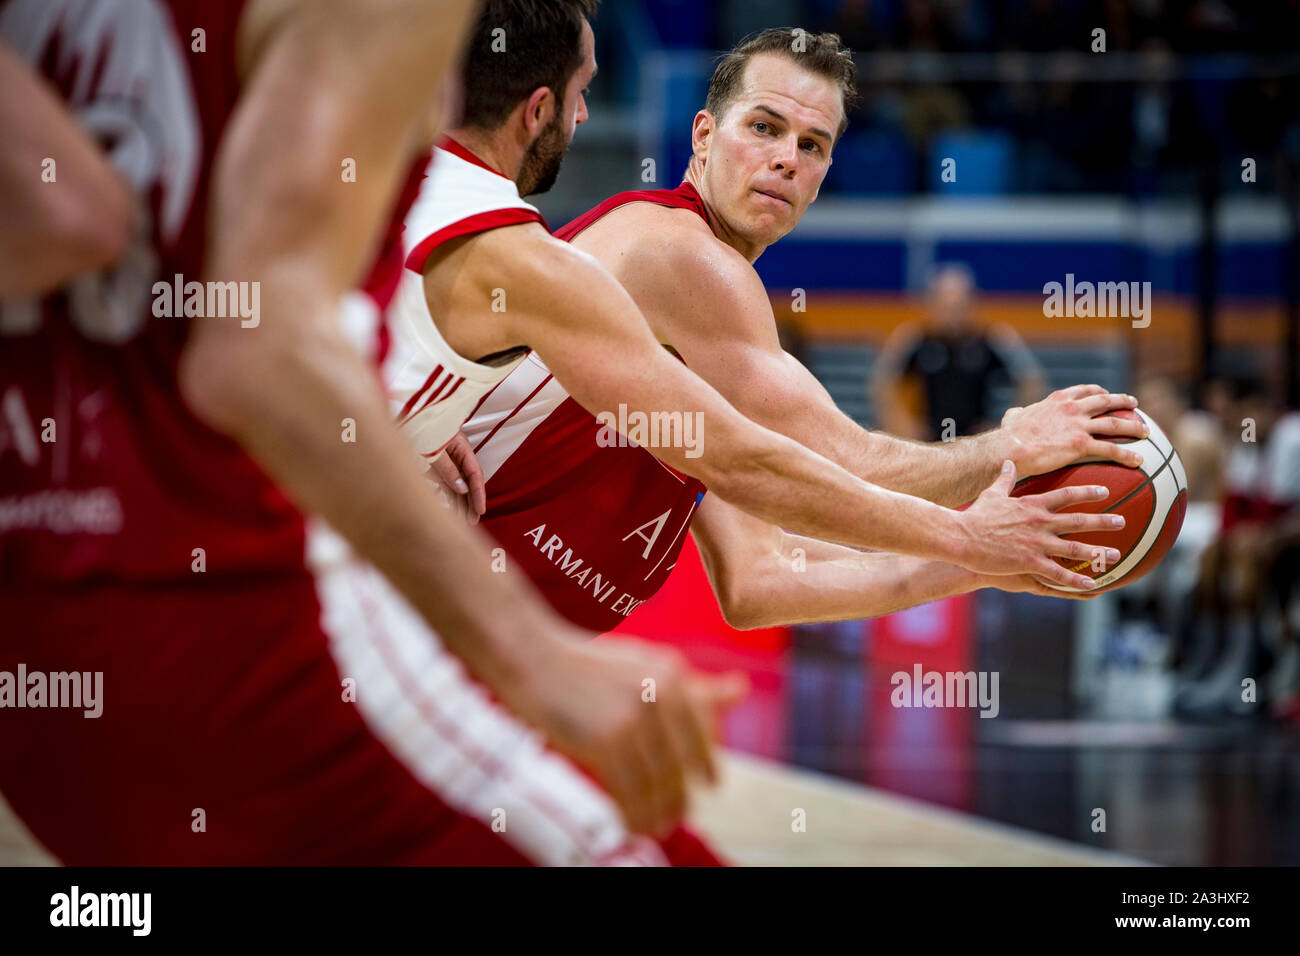 Milano, Italy. 06th Oct, 2019. Michael Roll (AX Armani Exchange Olimpia Milano) during Legabasket Serie A basketball match AX Armani Exchange Olimpia Milano vs Pallacanestro Trieste in Milano, Palalido Allianz Cloud, the home team won 88-74. Italy 6th October 2019. (Photo by Matteo Cogliati/Pacific Press) Credit: Pacific Press Agency/Alamy Live News Stock Photo